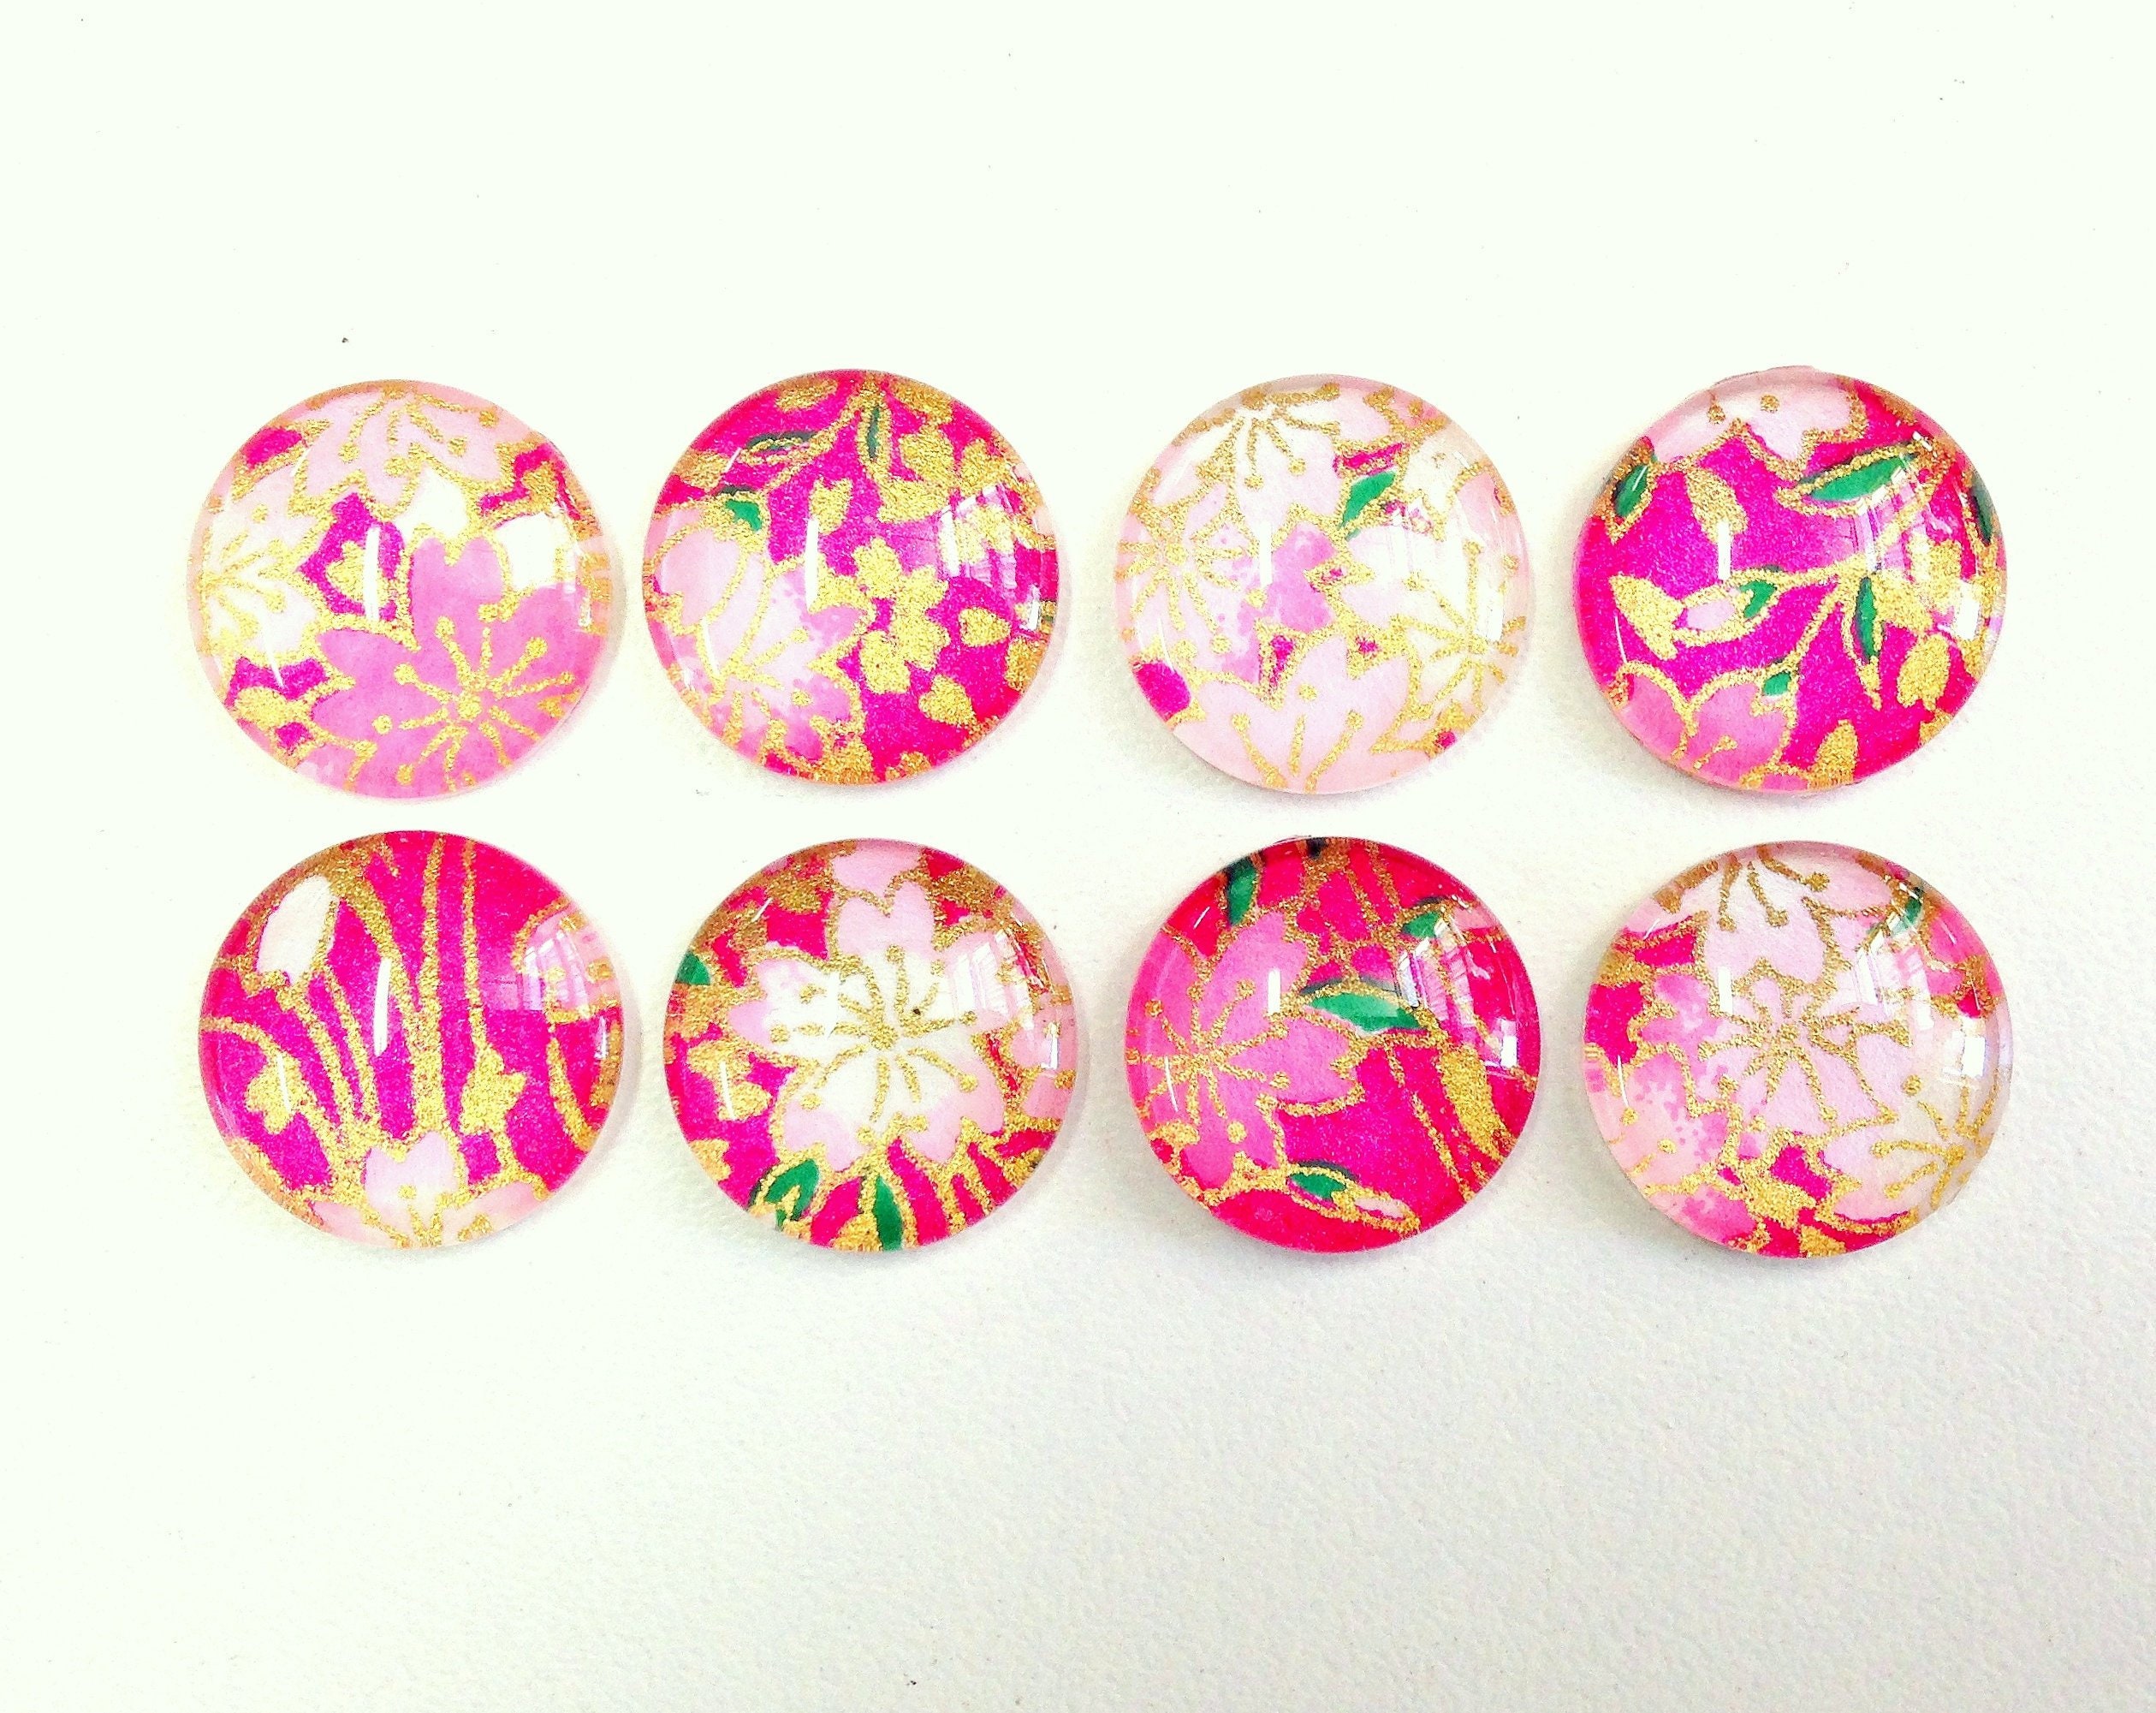 Mixed Bag Magnet Set, Pink and Red Glass Magnets, Fridge Magnets, Japanese  Chiyogami Flower Magnet, Teacher Gift, Refrigerator Magnets, Cute -   Hong Kong